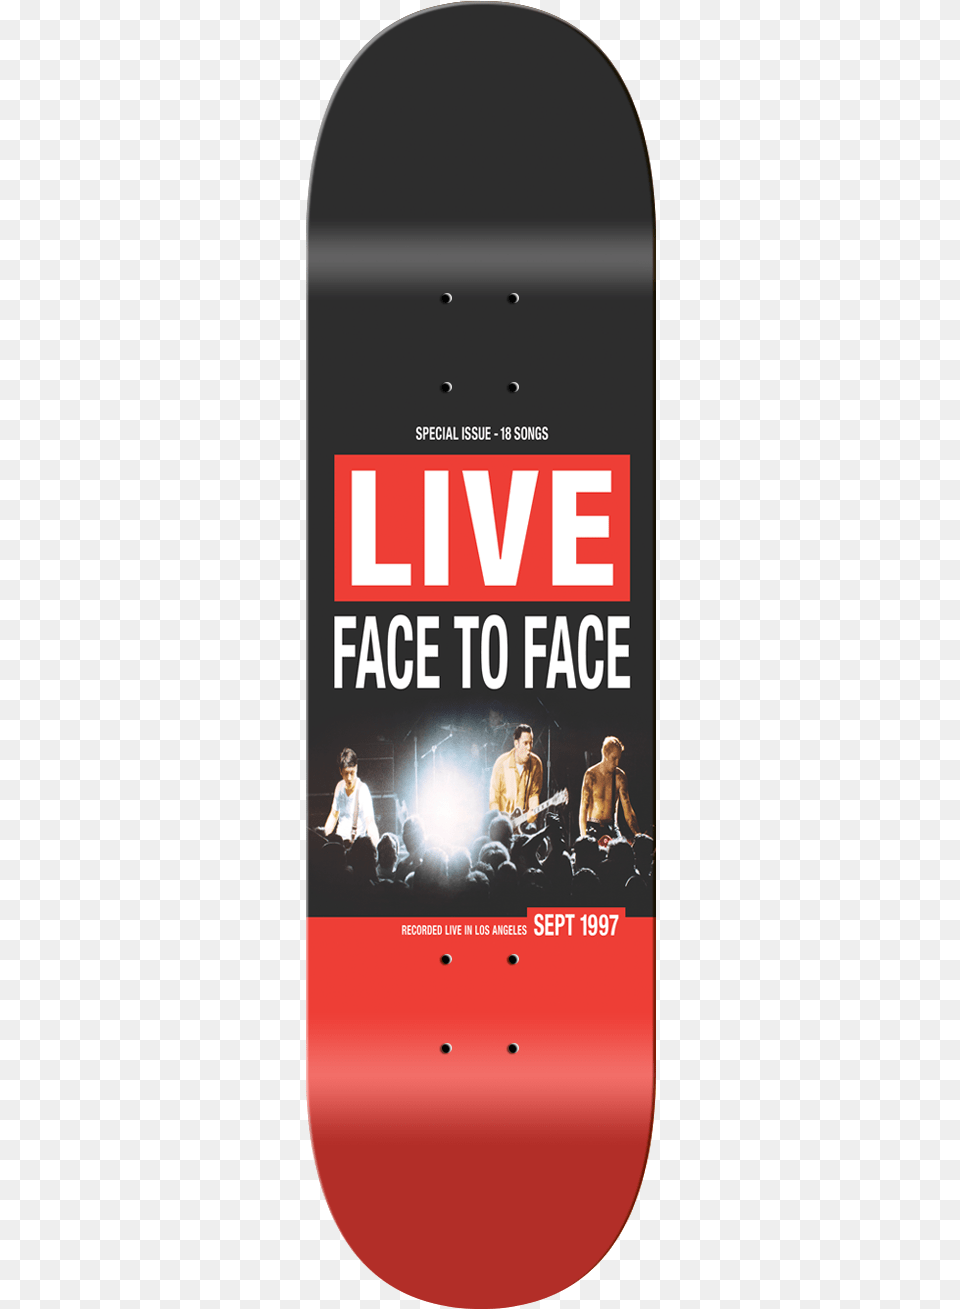 Face To Face Live Album, Advertisement, Poster, Person Png